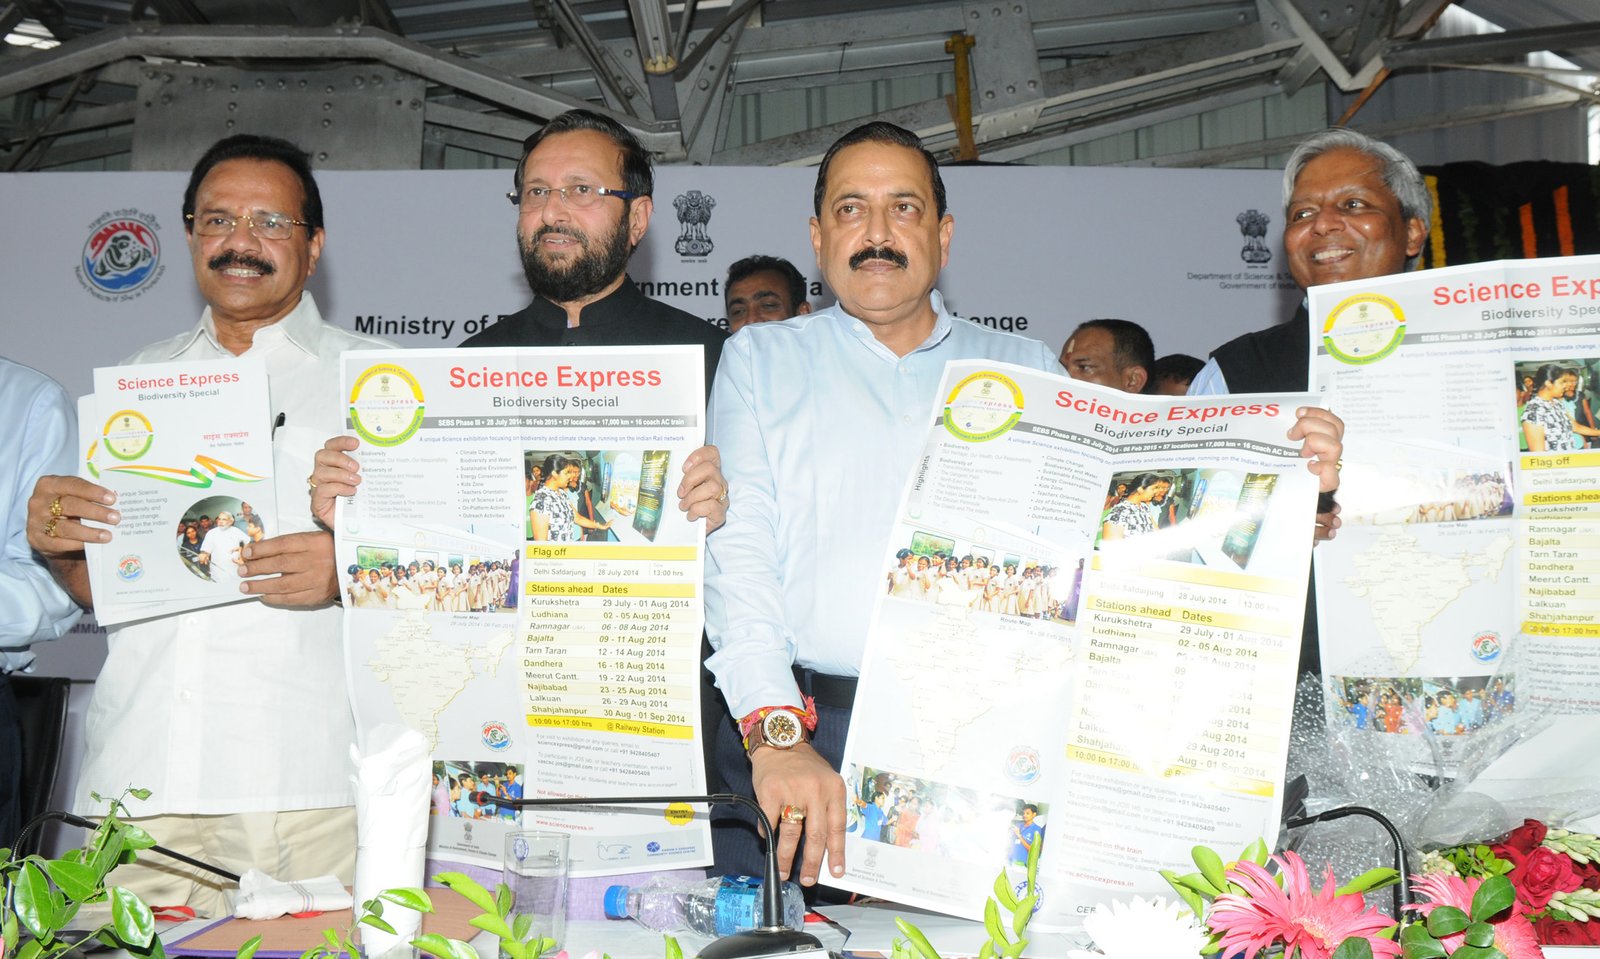 The Ministers of State for Information and Broadcasting, Environment, Forest and Climate Change and Parliamentary Affairs, Shri Prakash Javadekar along with the Union Minister for Railways, Shri DV Sadananda Gowda and the Minister of State for Science and